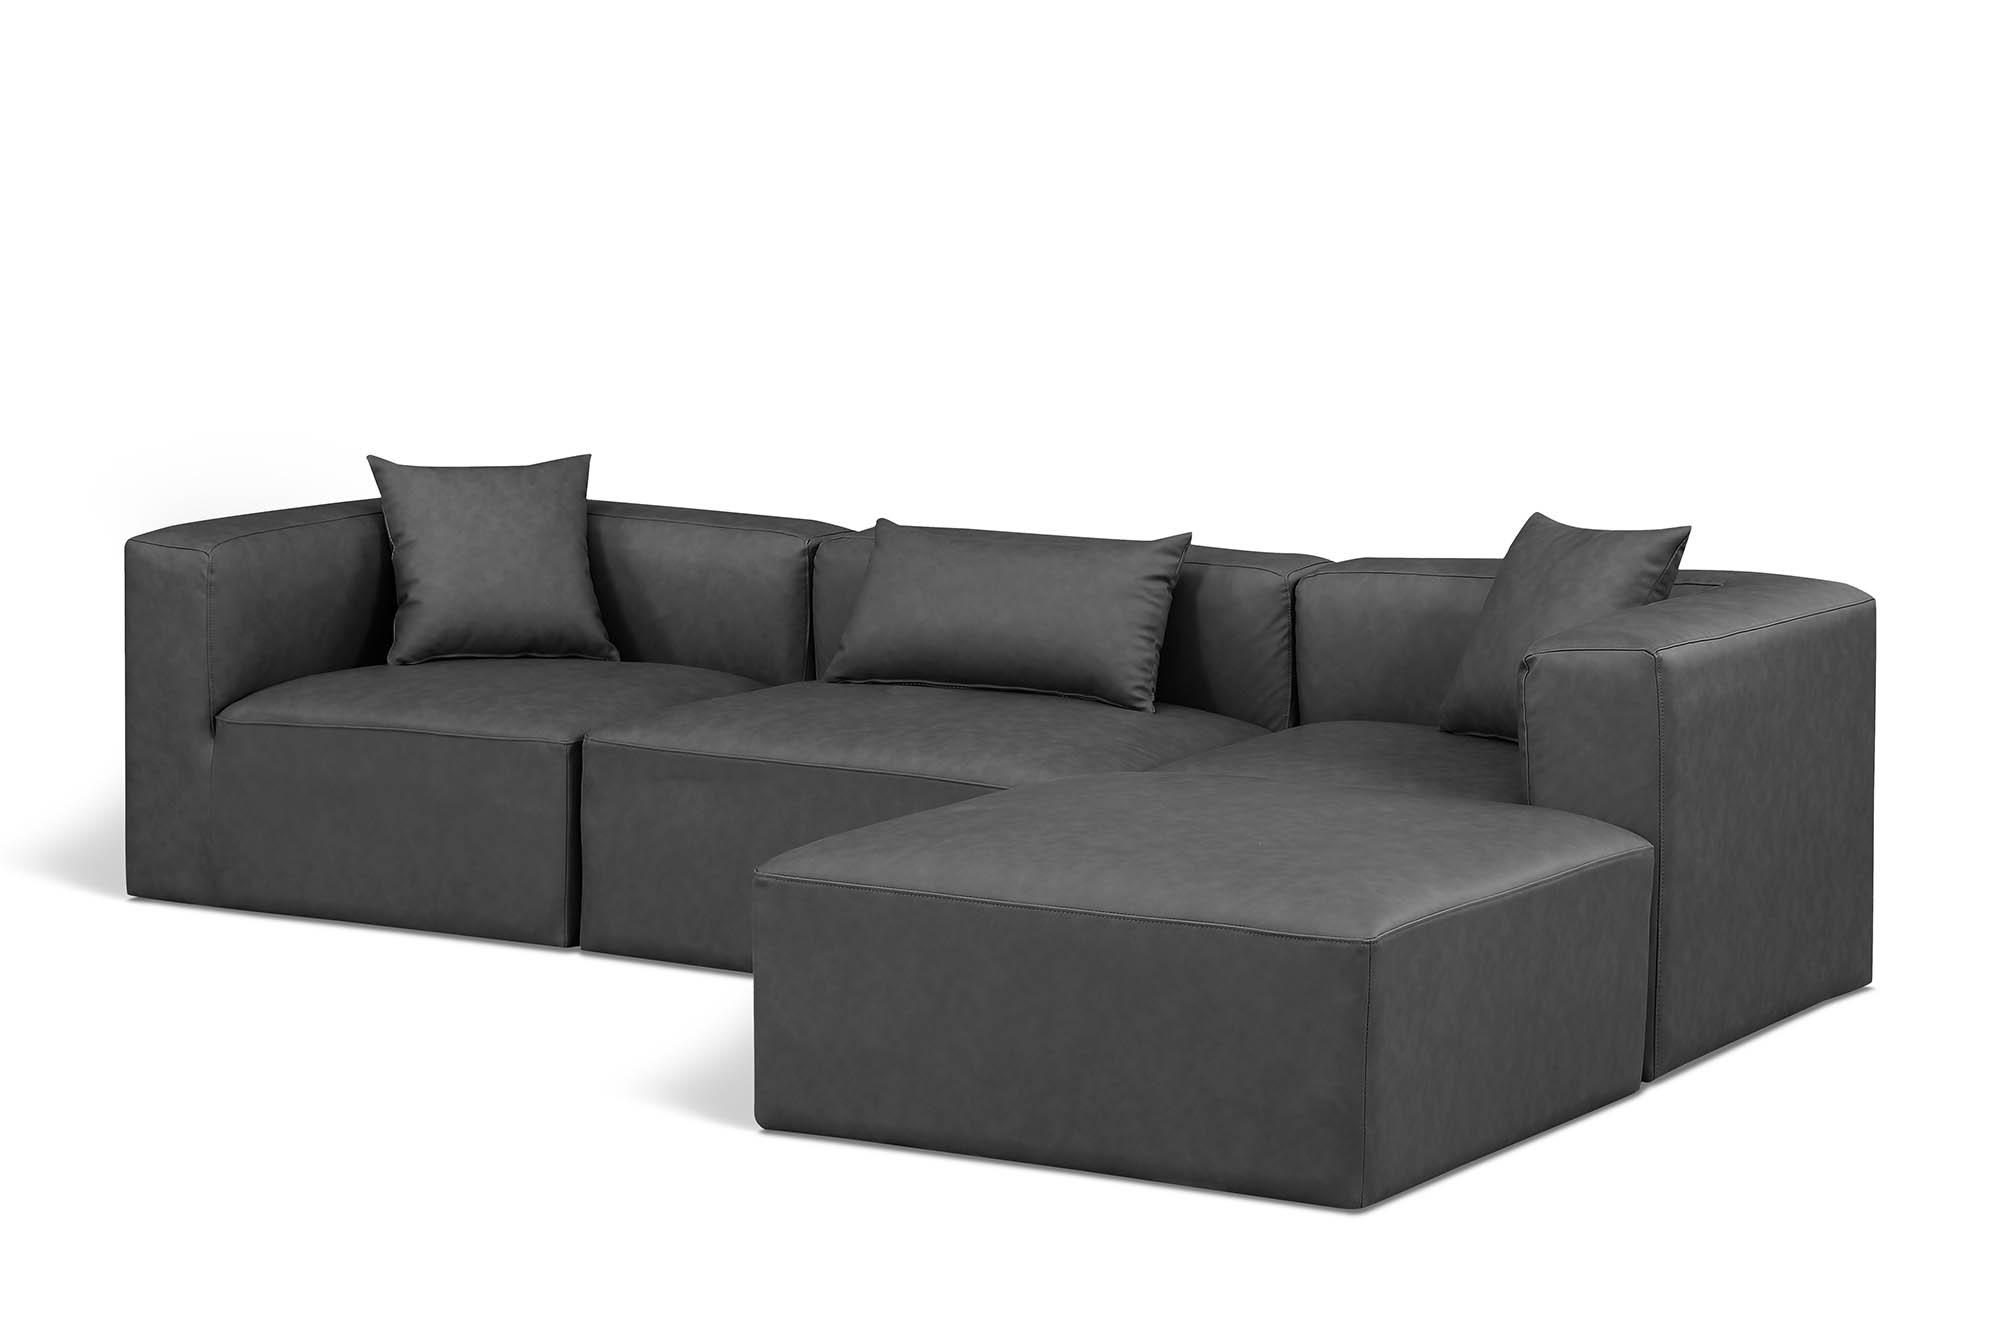 Contemporary, Modern Modular Sectional Sofa CUBE 668Grey-Sec4A 668Grey-Sec4A in Gray Faux Leather